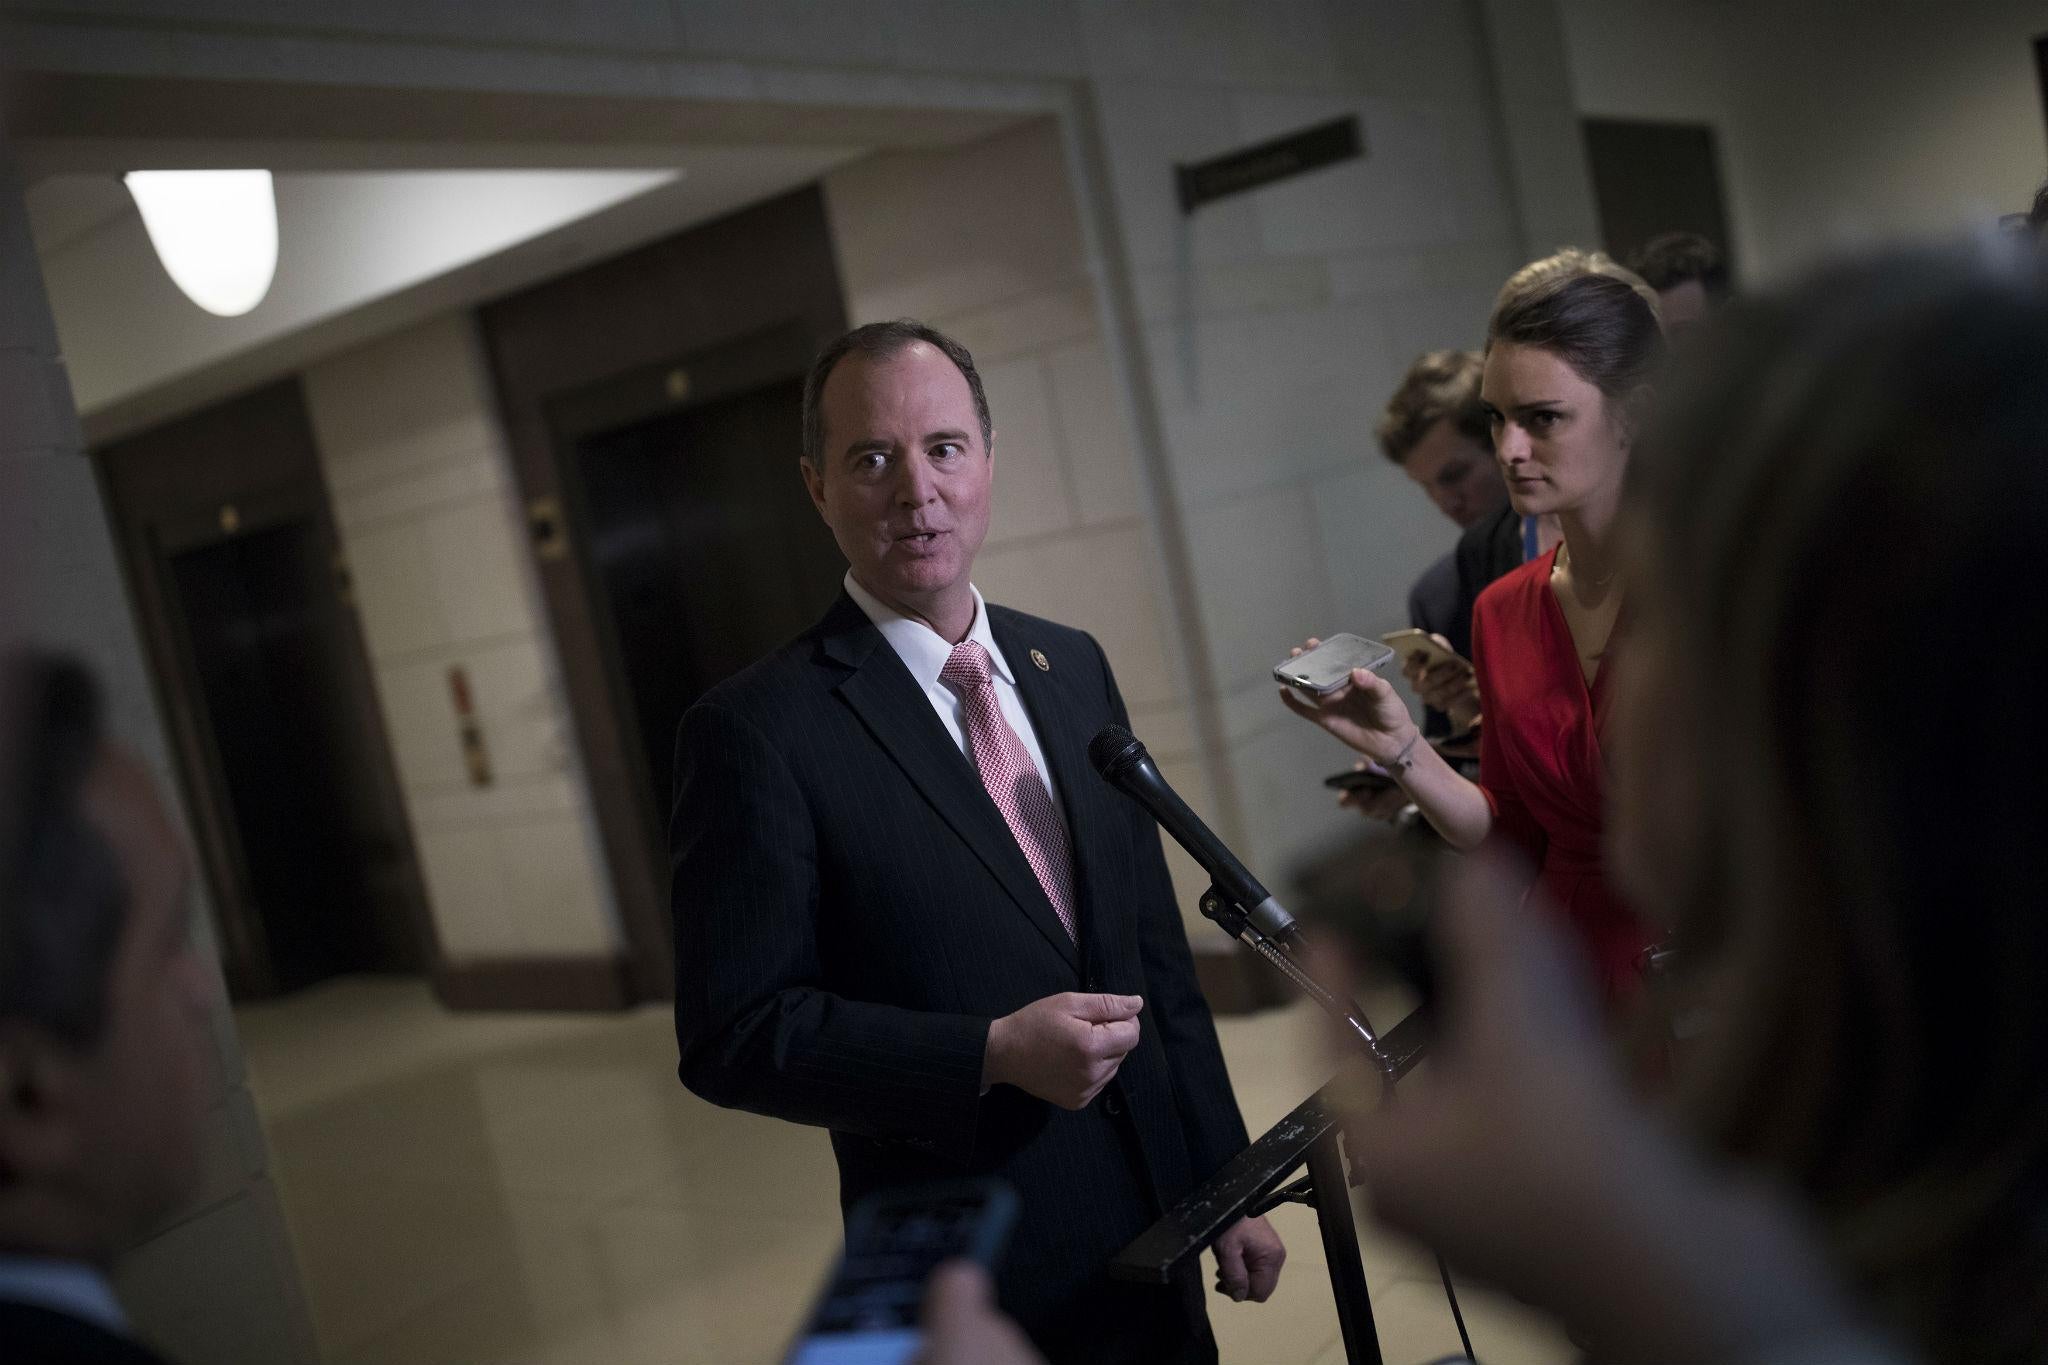 The top Democrat on the House Intelligence Committee, Adam Schiff, has said the Russian indictment doesn't clear the Trump campaign of collusion